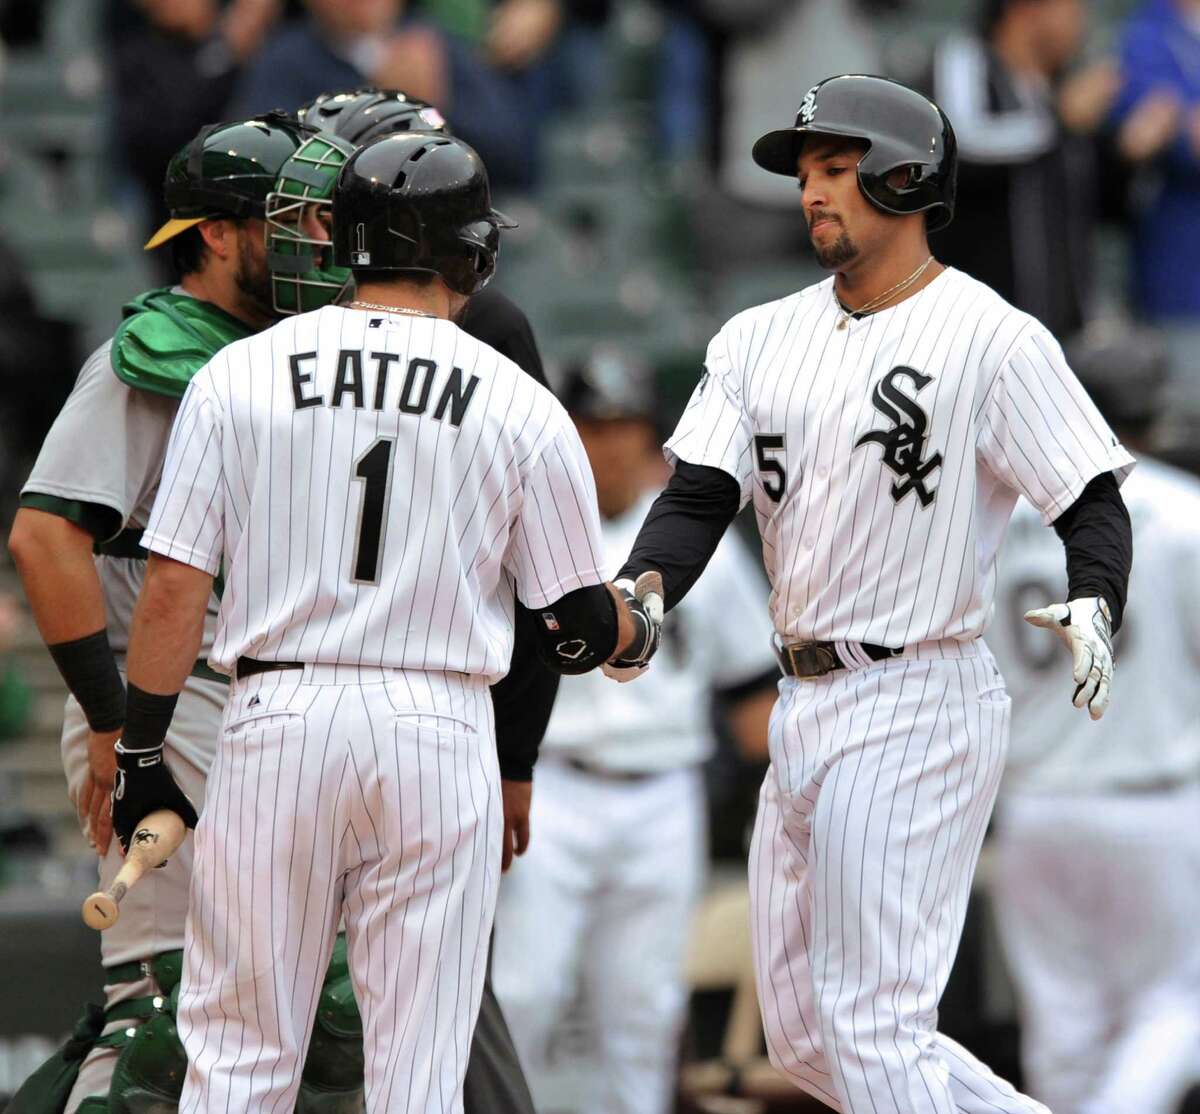 Chicago White Sox's Marcus Semien (5), celebrates with teammate Adam Eaton (1), after hitting a solo home run during the sixth inning of a baseball game against the Oakland Athletics in Chicago, Thursday, Sept. 11, 2014.